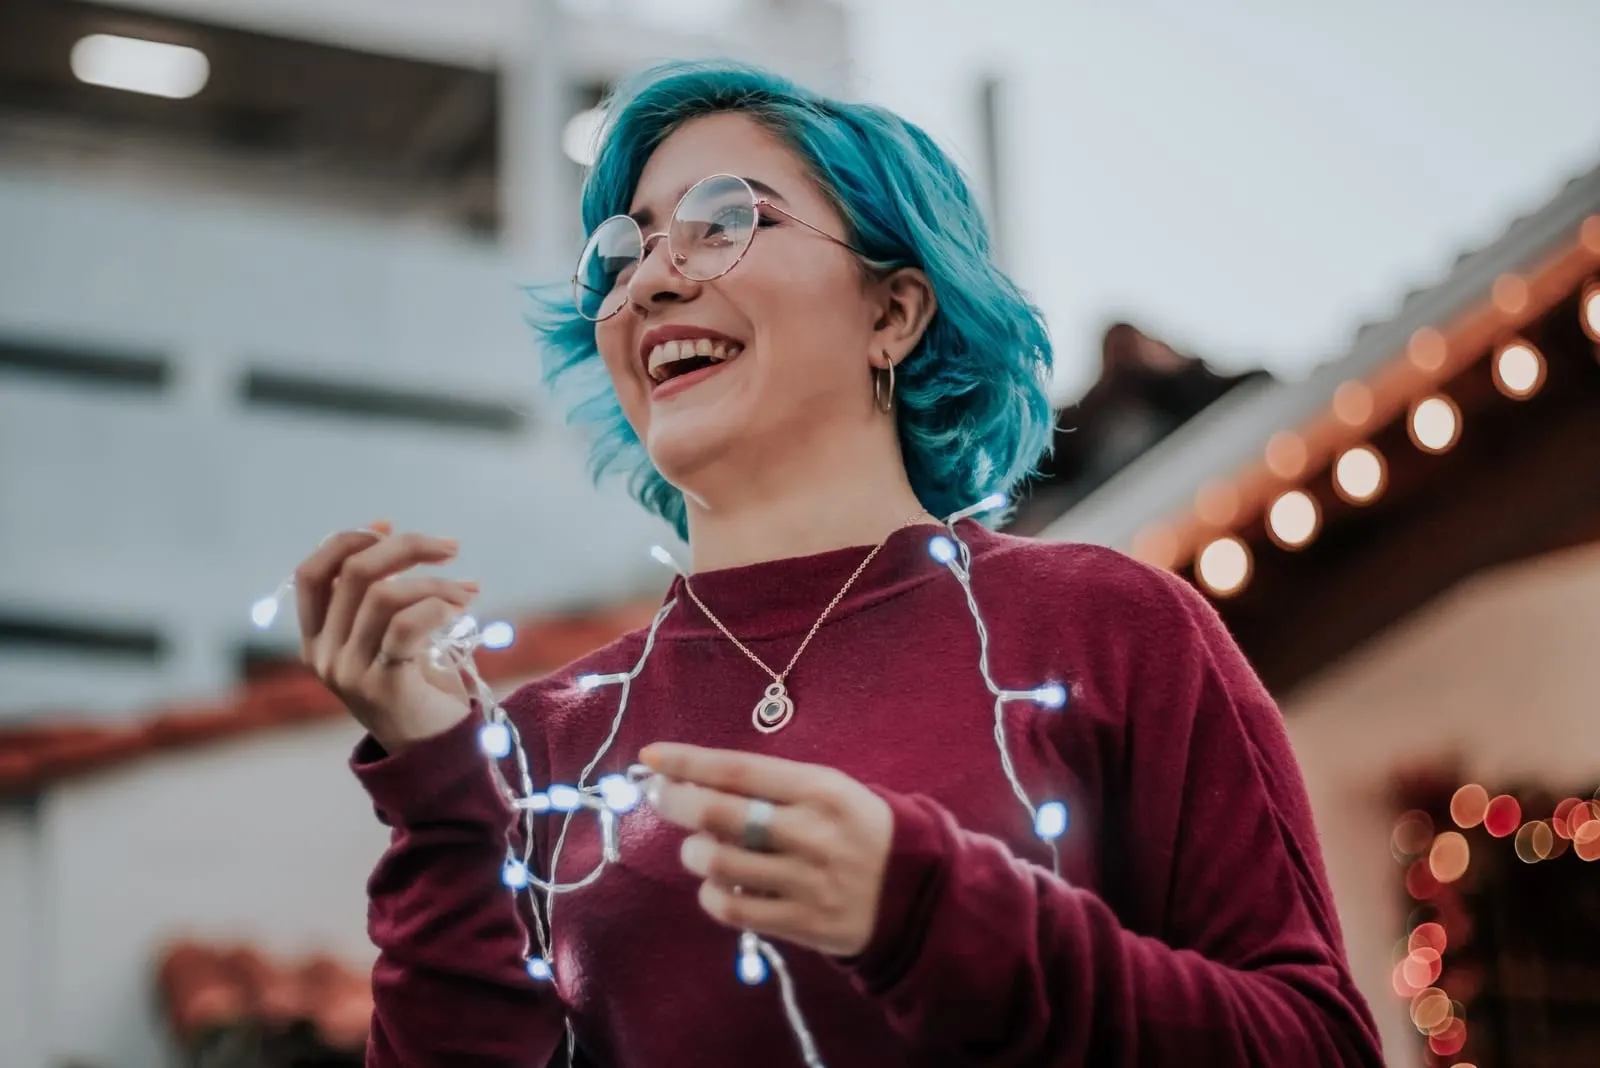 woman with blue hair holding string lights outdoor